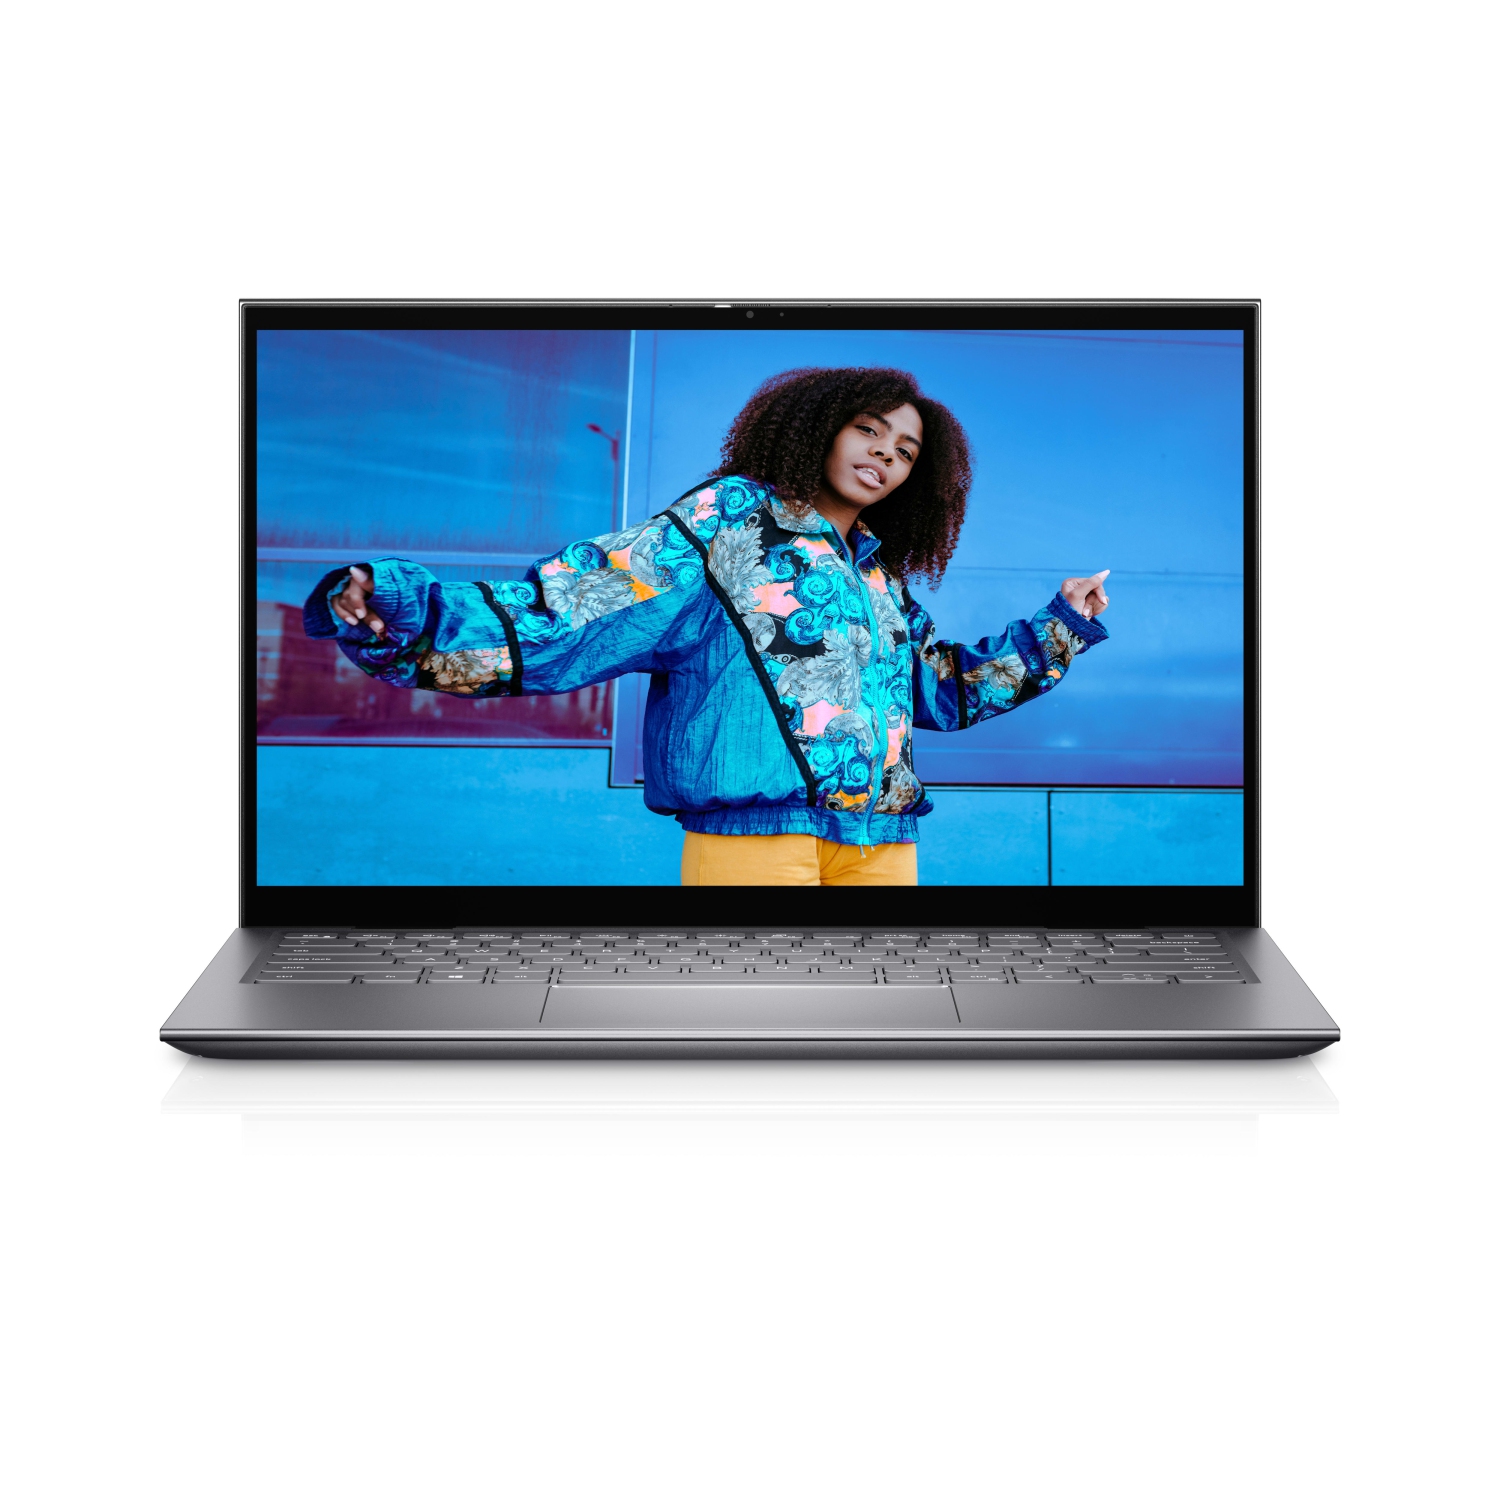 Dell Inspiron 14 5410 2-in-1 (2021) | 14" FHD Touch | Core i5 - 256GB SSD - 8GB RAM | 4 Cores @ 4.5 GHz - 11th Gen CPU Certified Refurbished